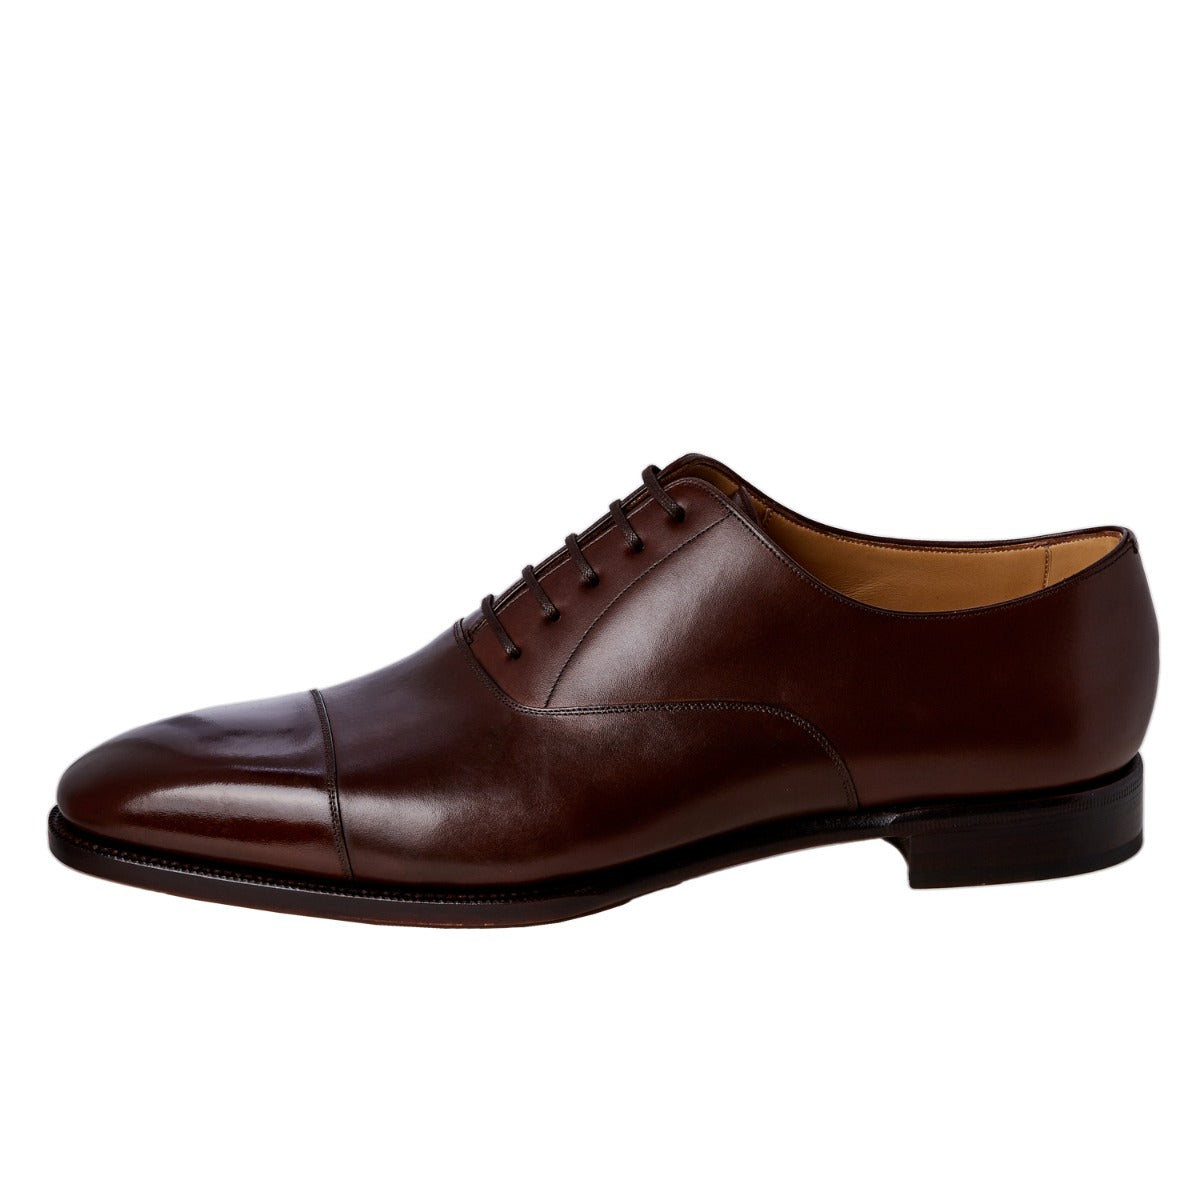 A men's TLB Dark Brown Captoe Oxford 10UK shoe on a white background, made-to-order by KirbyAllison.com.